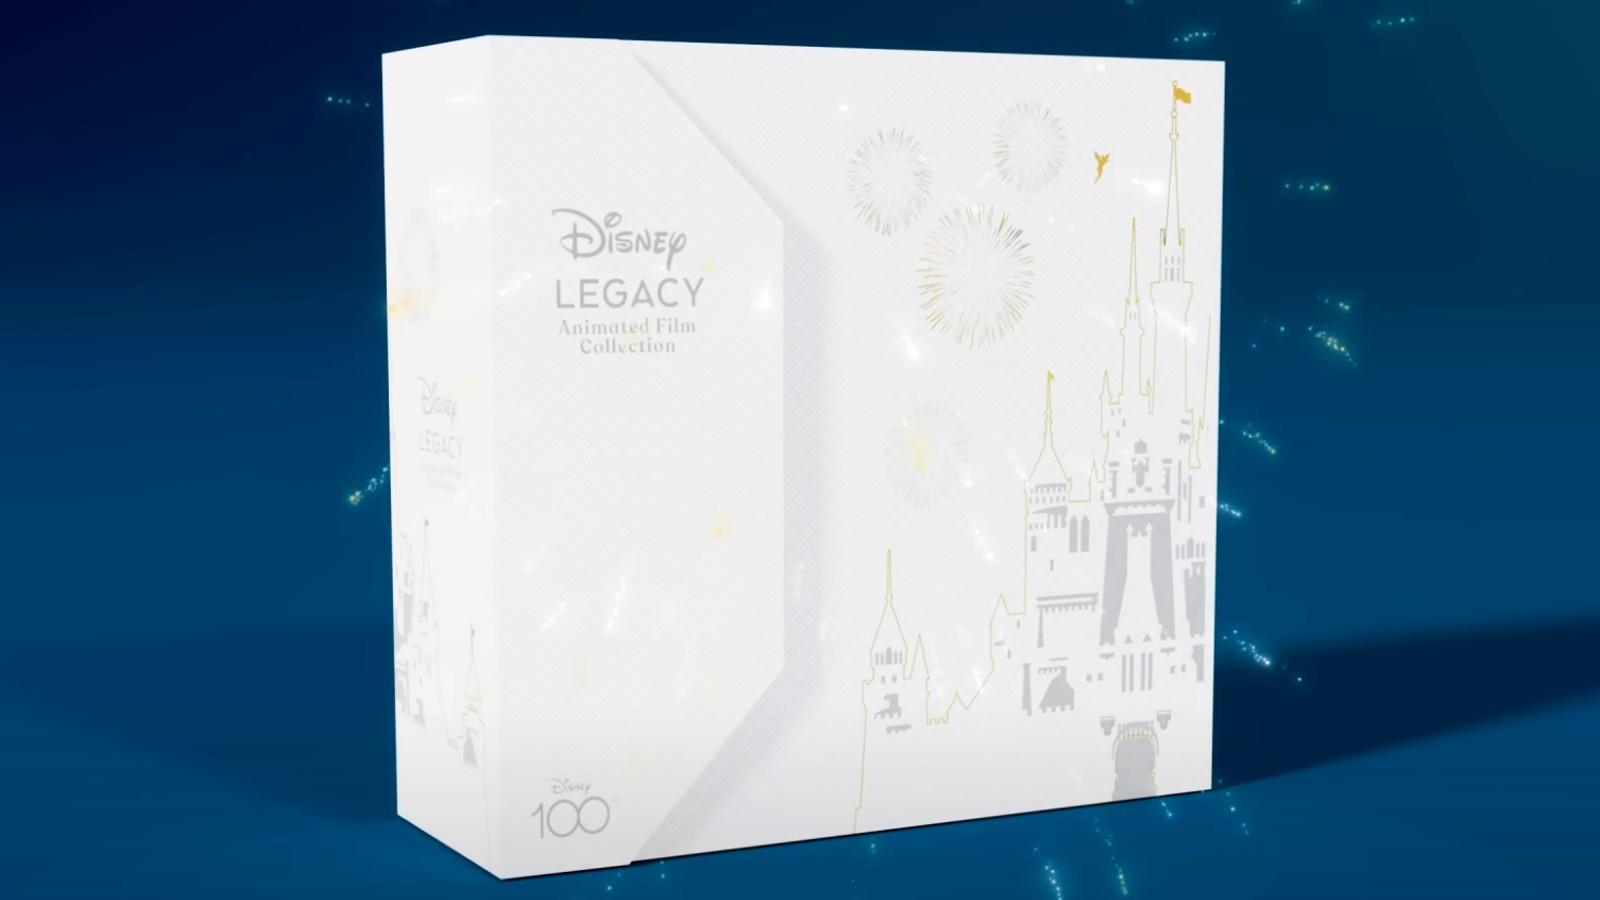 The Disney Legacy Animated Blu-ray collection